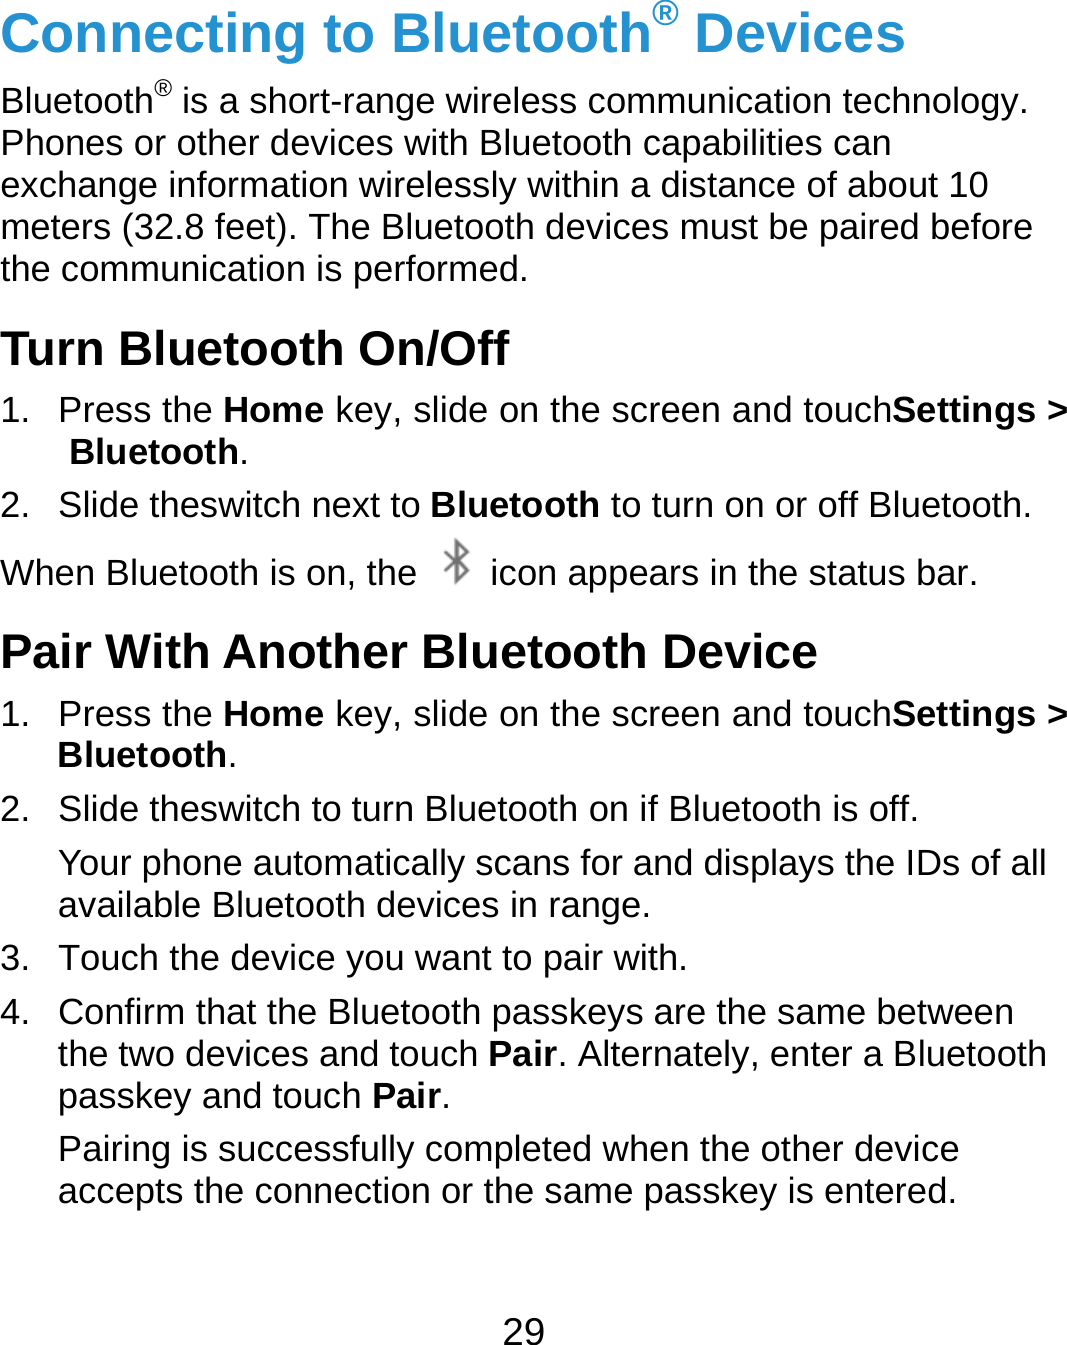  29 Connecting to Bluetooth® Devices Bluetooth® is a short-range wireless communication technology. Phones or other devices with Bluetooth capabilities can exchange information wirelessly within a distance of about 10 meters (32.8 feet). The Bluetooth devices must be paired before the communication is performed. Turn Bluetooth On/Off 1. Press the Home key, slide on the screen and touchSettings &gt; Bluetooth. 2.  Slide theswitch next to Bluetooth to turn on or off Bluetooth. When Bluetooth is on, the    icon appears in the status bar.   Pair With Another Bluetooth Device 1. Press the Home key, slide on the screen and touchSettings &gt; Bluetooth. 2.  Slide theswitch to turn Bluetooth on if Bluetooth is off. Your phone automatically scans for and displays the IDs of all available Bluetooth devices in range. 3.  Touch the device you want to pair with. 4.  Confirm that the Bluetooth passkeys are the same between the two devices and touch Pair. Alternately, enter a Bluetooth passkey and touch Pair. Pairing is successfully completed when the other device accepts the connection or the same passkey is entered.  